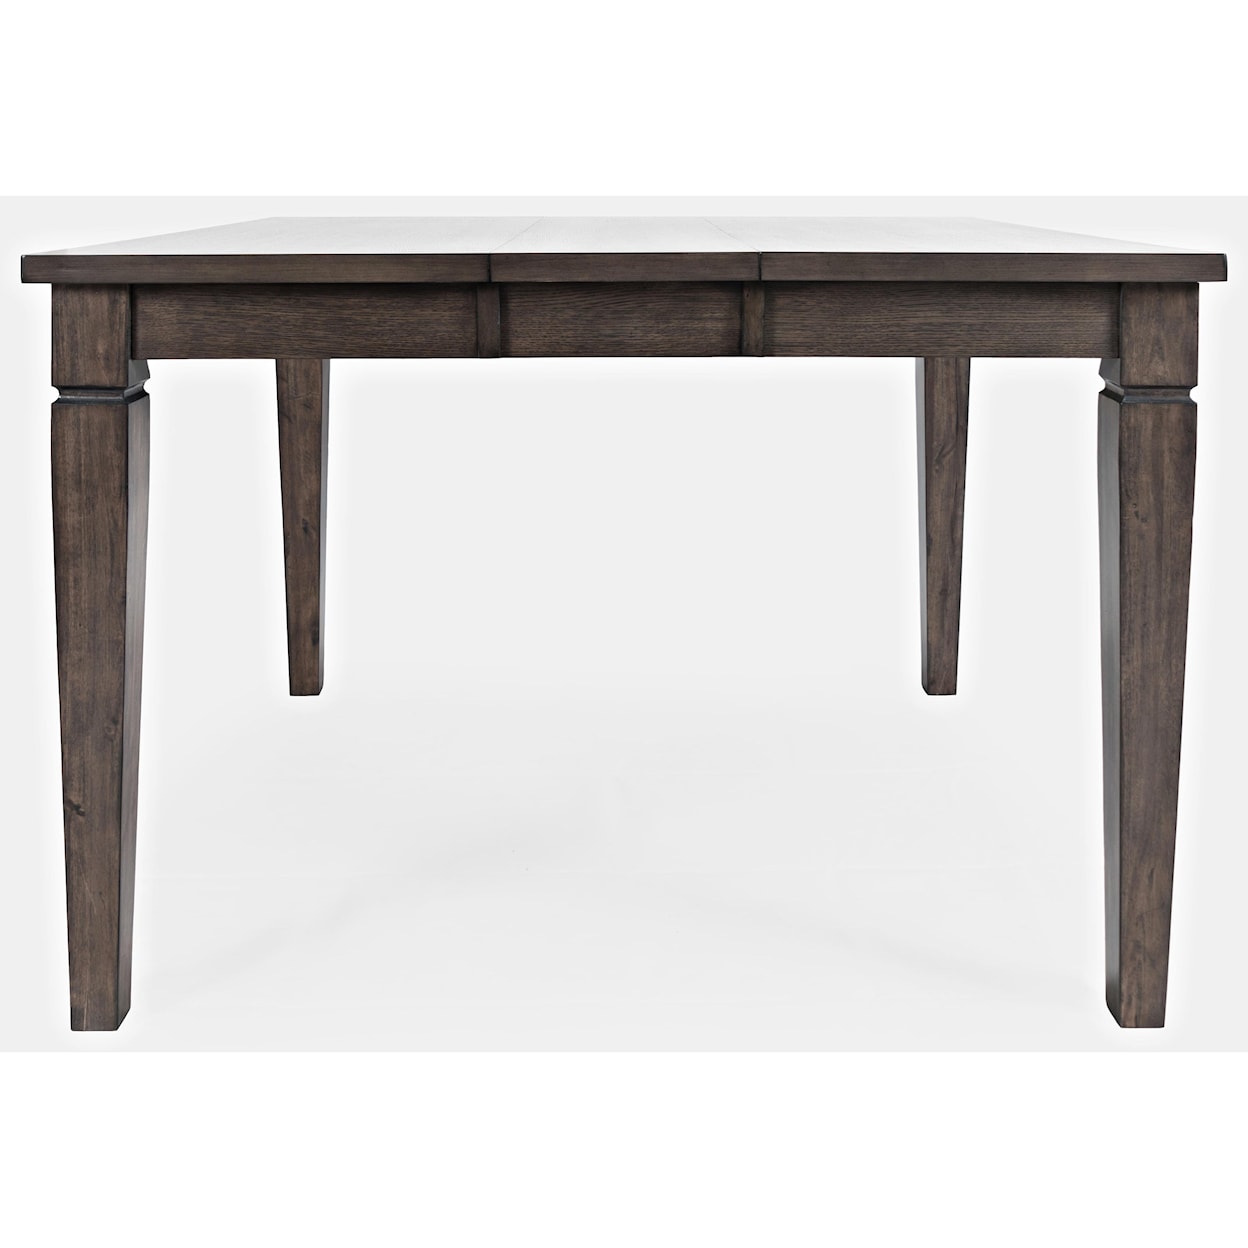 Jofran Lincoln Square Counter Height Table